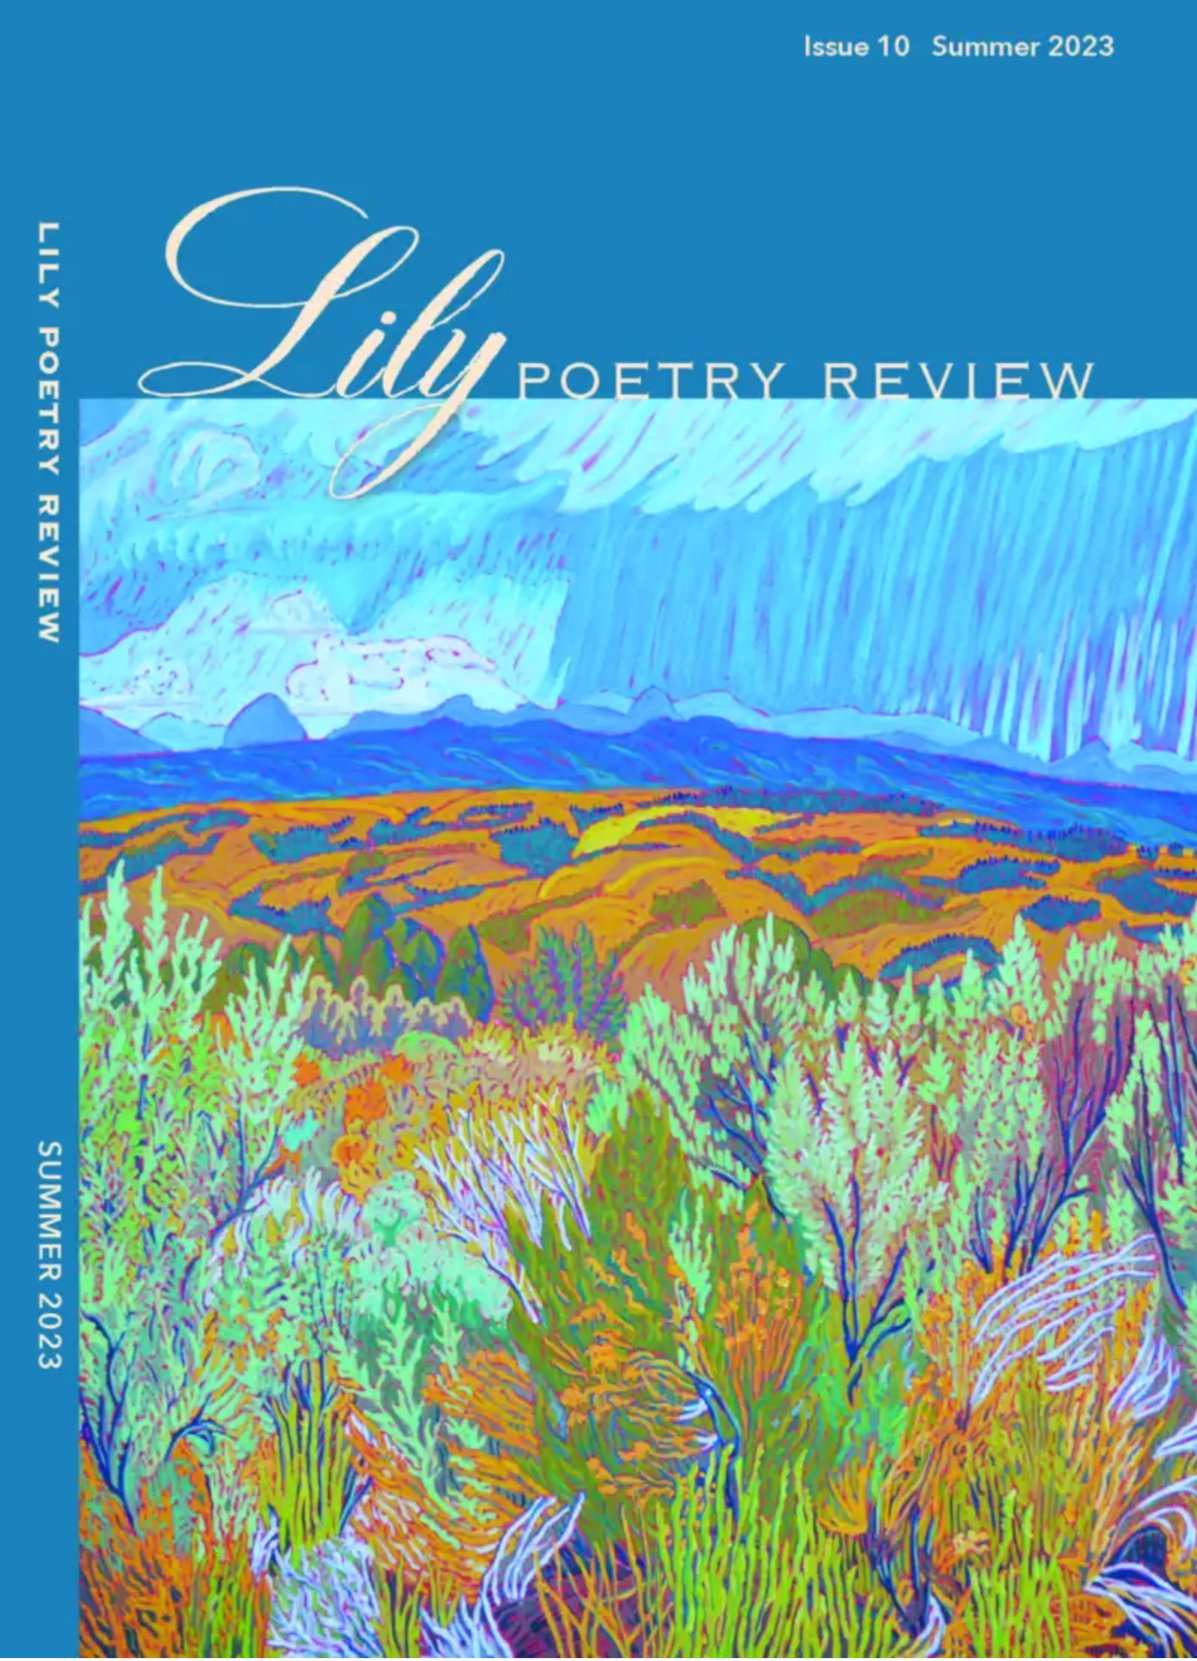 The Lilly Poetry Review